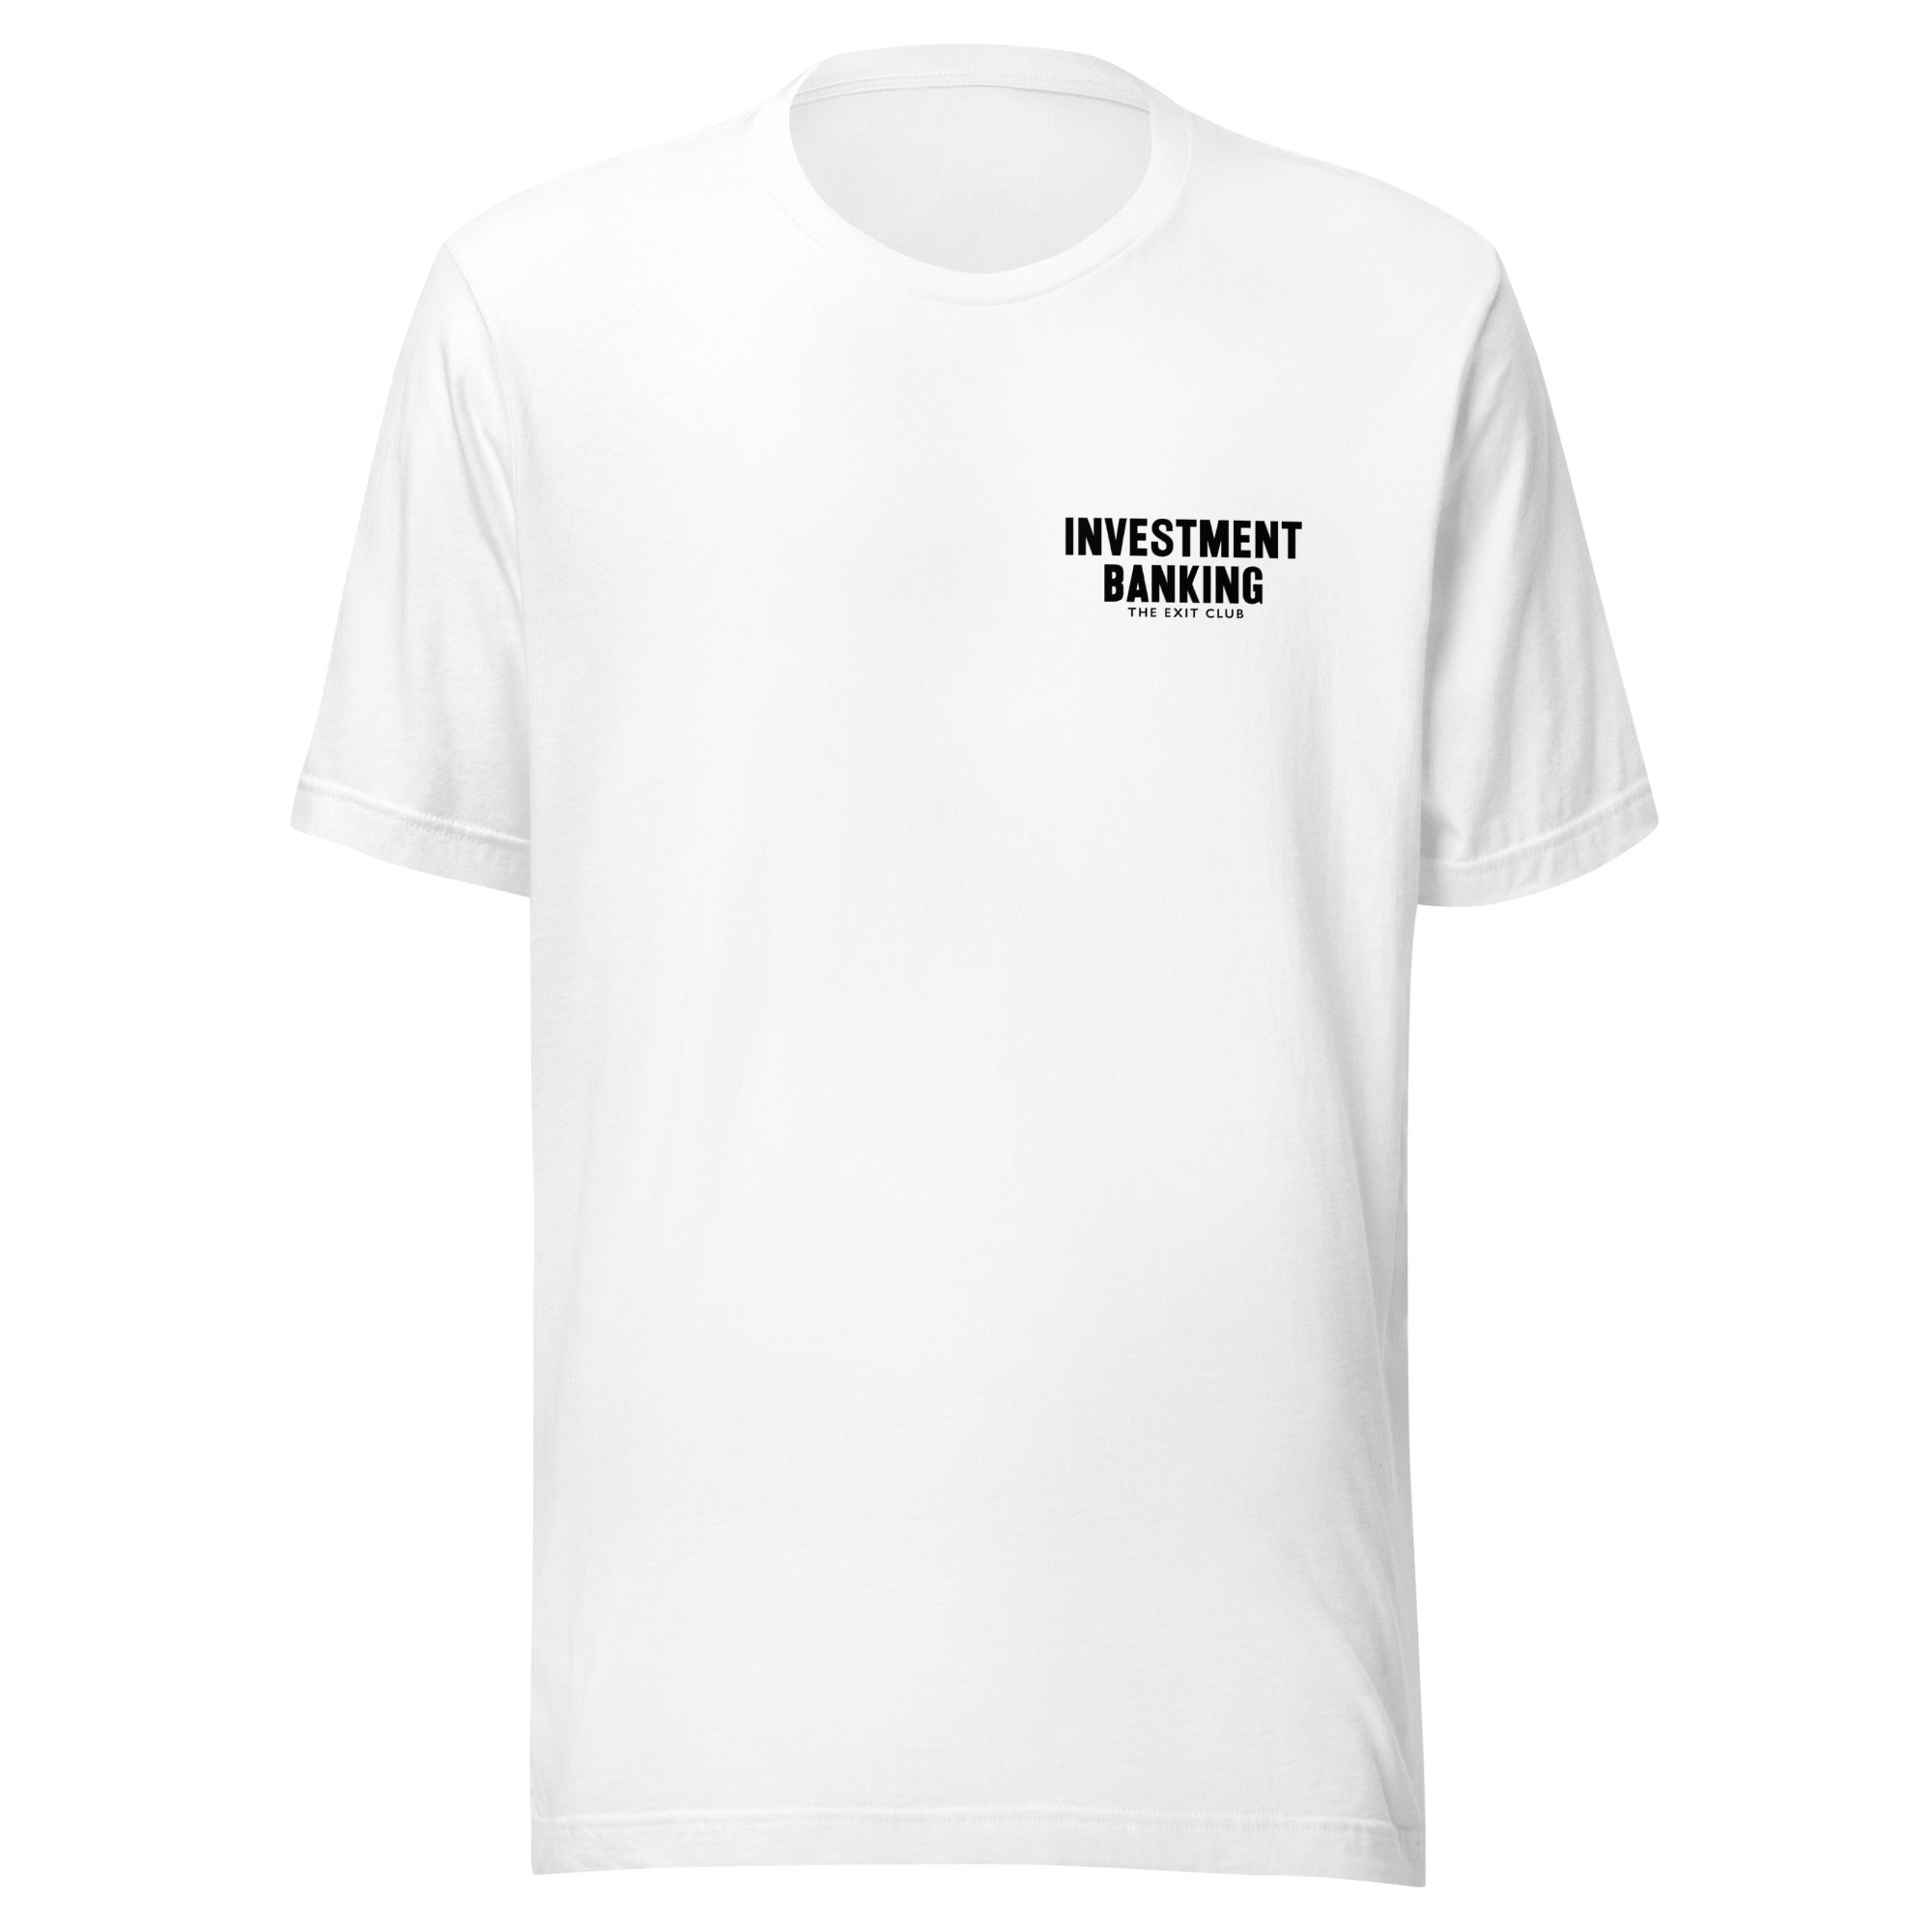 INVESTMENT BANKING T-SHIRT